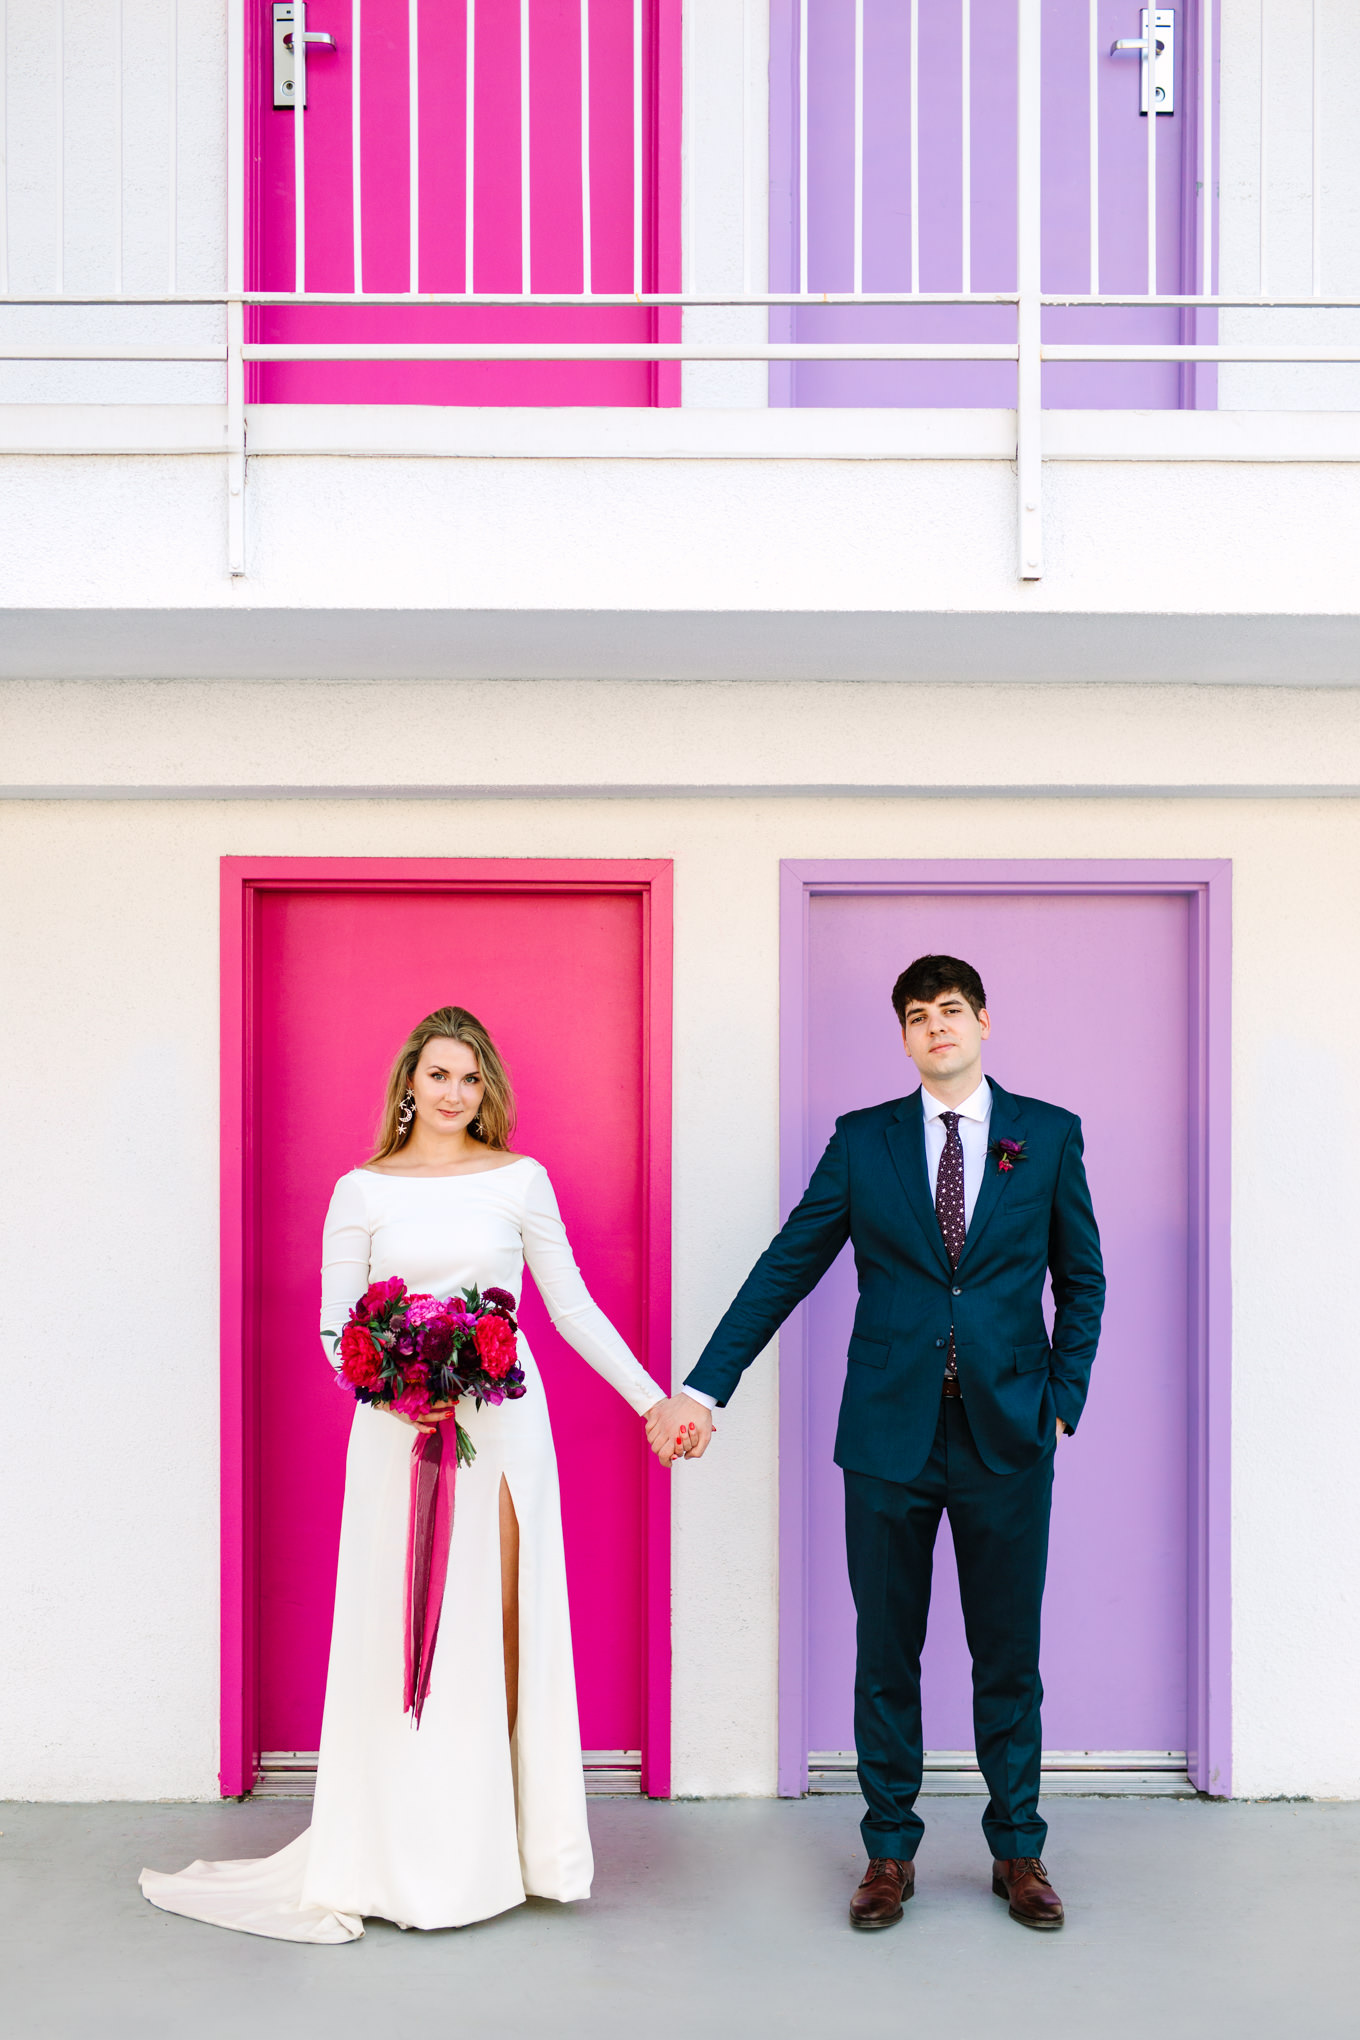 Bride and groom in front of Saguaro Hotel doors | Colorful jewel tone Palm Springs elopement | Fresh and colorful photography for fun-loving couples in Southern California | #colorfulelopement #palmspringselopement #elopementphotography #palmspringswedding Source: Mary Costa Photography | Los Angeles